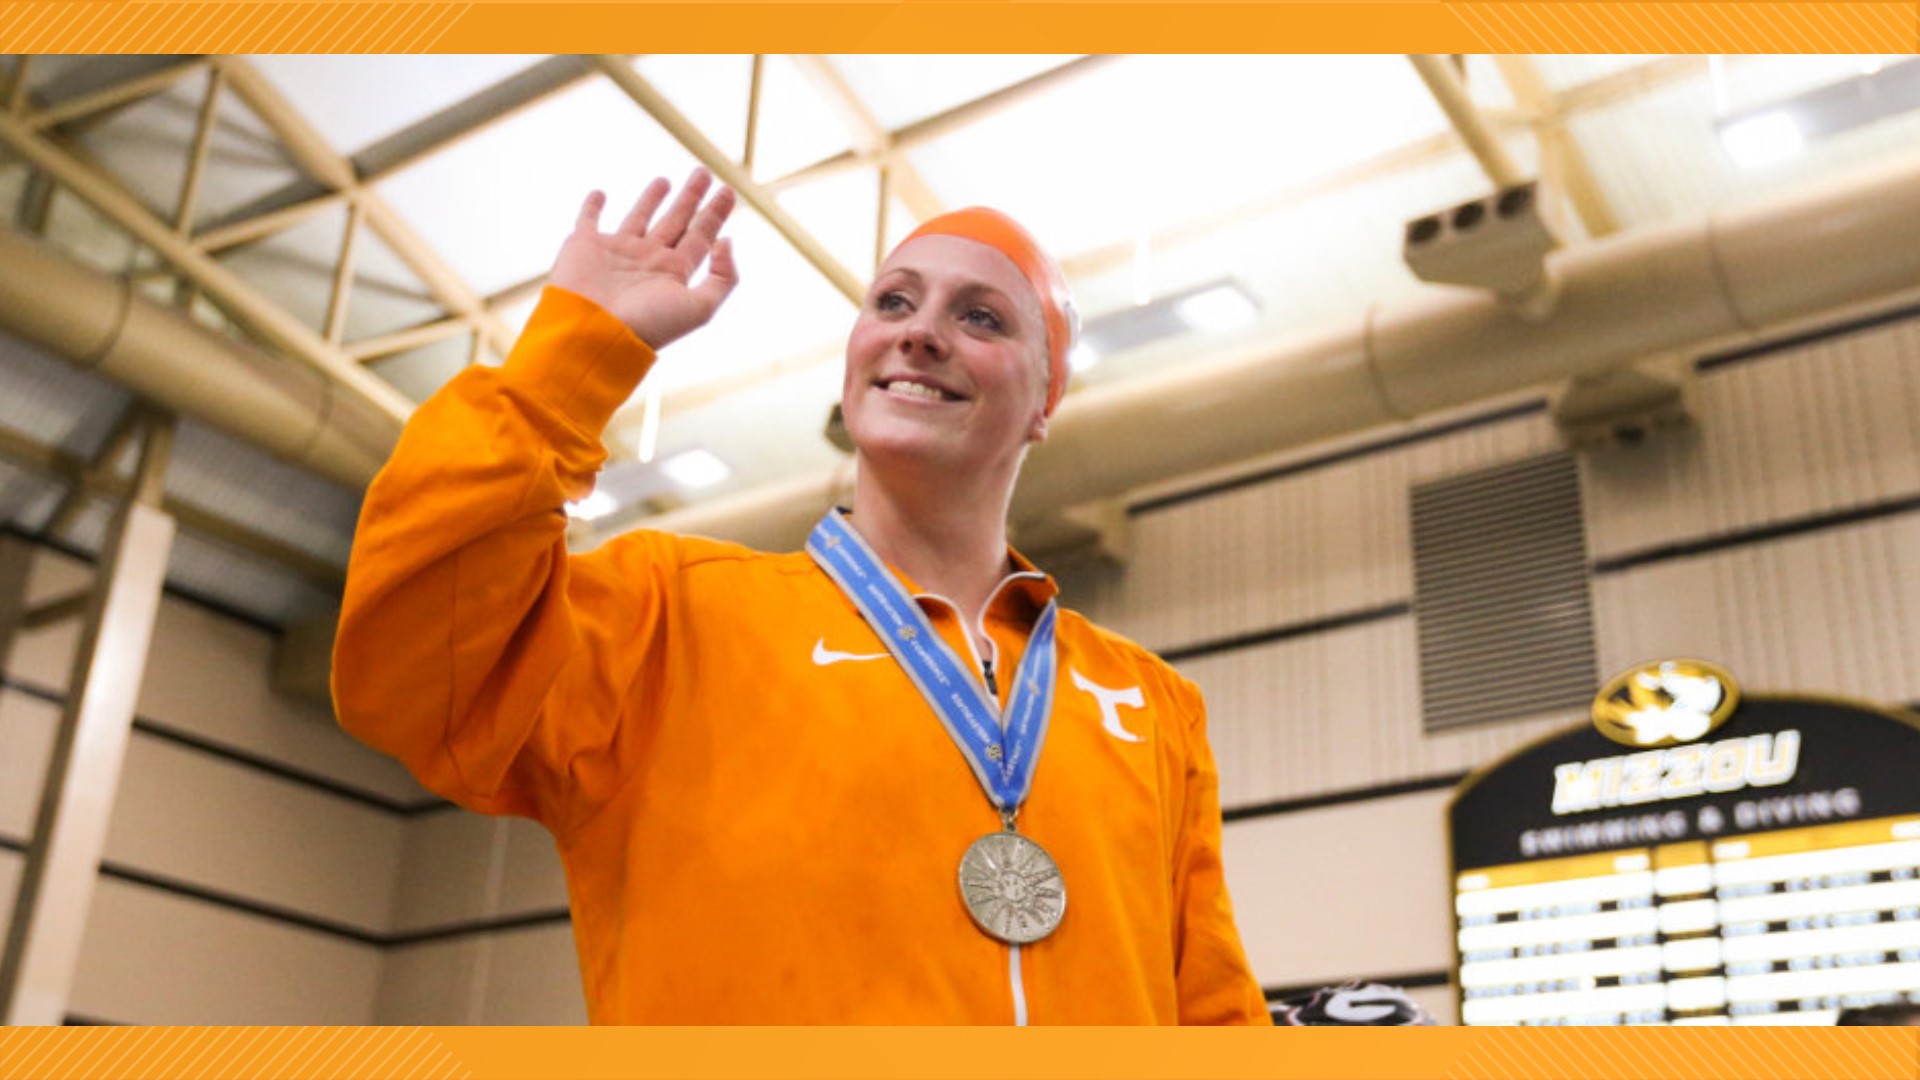 Toussaint is set to become the first Tennessee women's swimmer or diver to compete in the Olympics while still being an active member of the team.